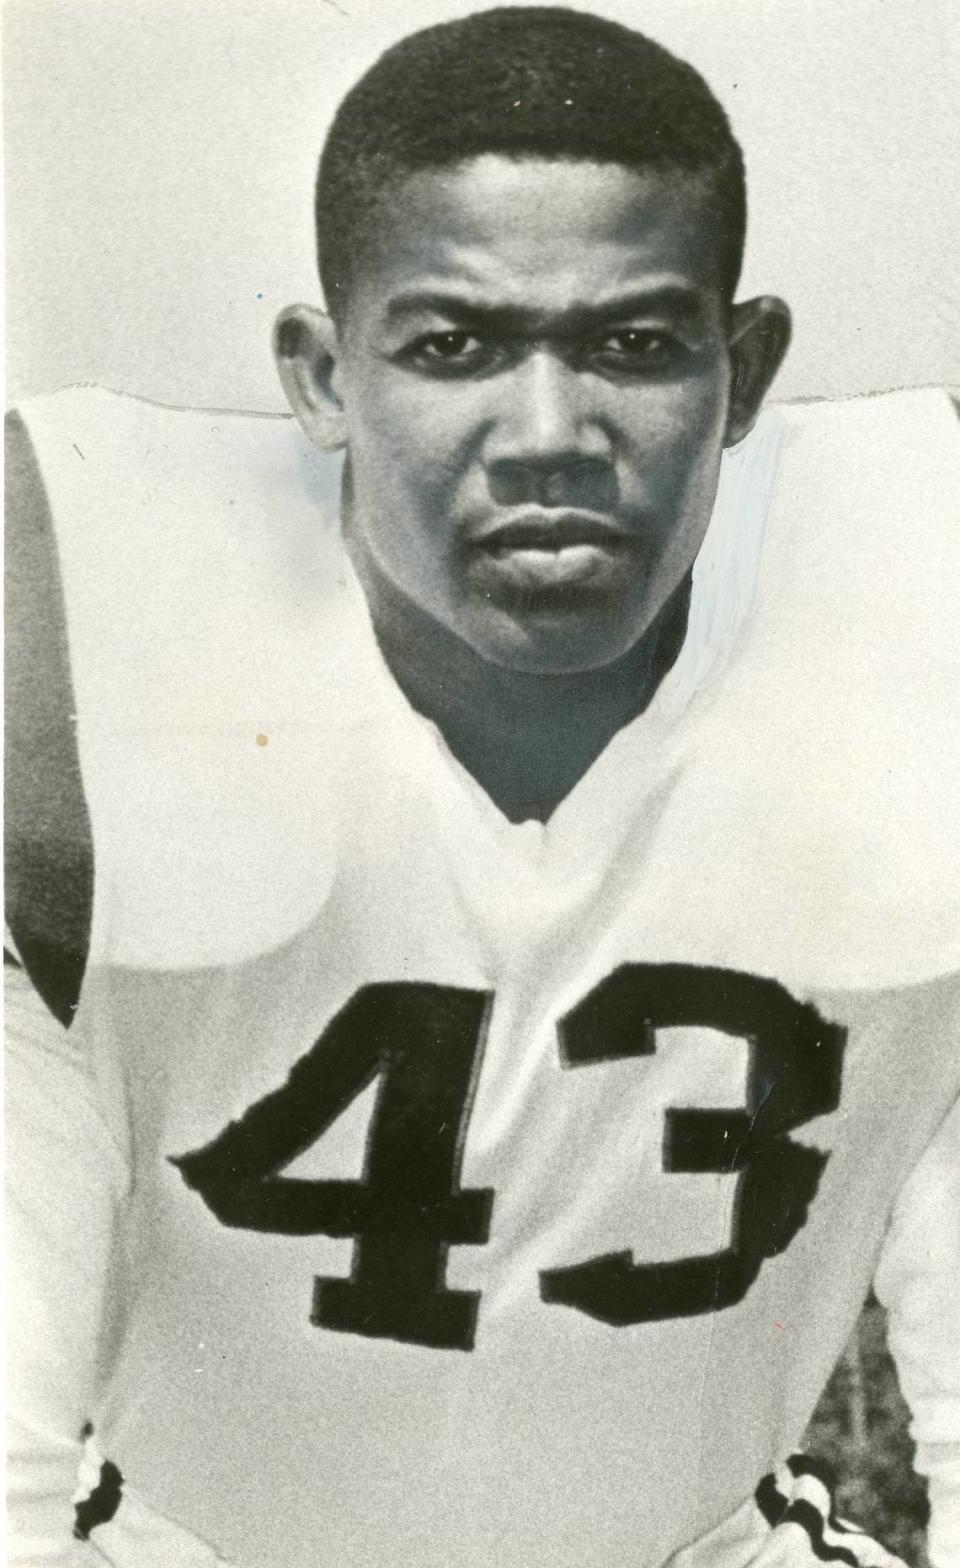 John Henry Jackson, shown in this undated photo from 1960, played quarterback for the Toronto Argonauts of the Canadian Football League and the now-defunct Toronto Rifles of the Continental Football League. He went on to open and operate the Underground Railroad soul food restaurant on King Street in Toronto, where he hosted celebrities and jazz music.